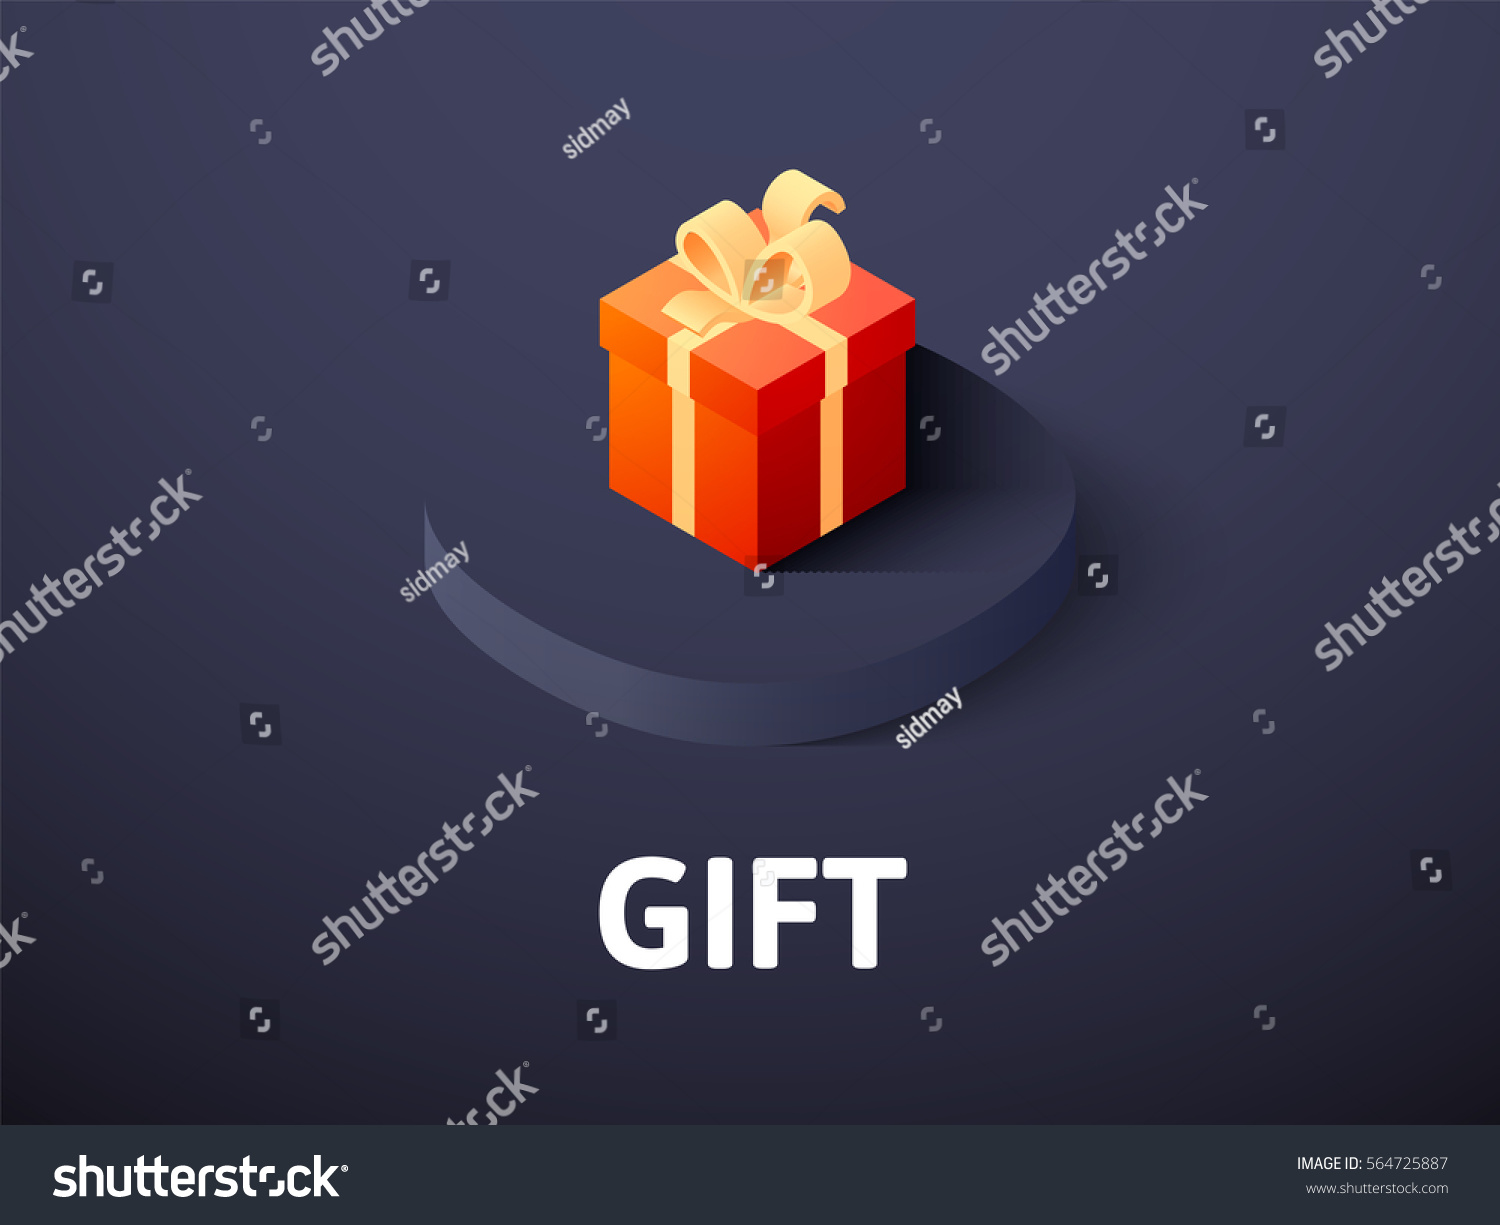 stock-vector-gift-icon-vector-symbol-in-flat-isometric-style-isolated-on-color-background-564725887